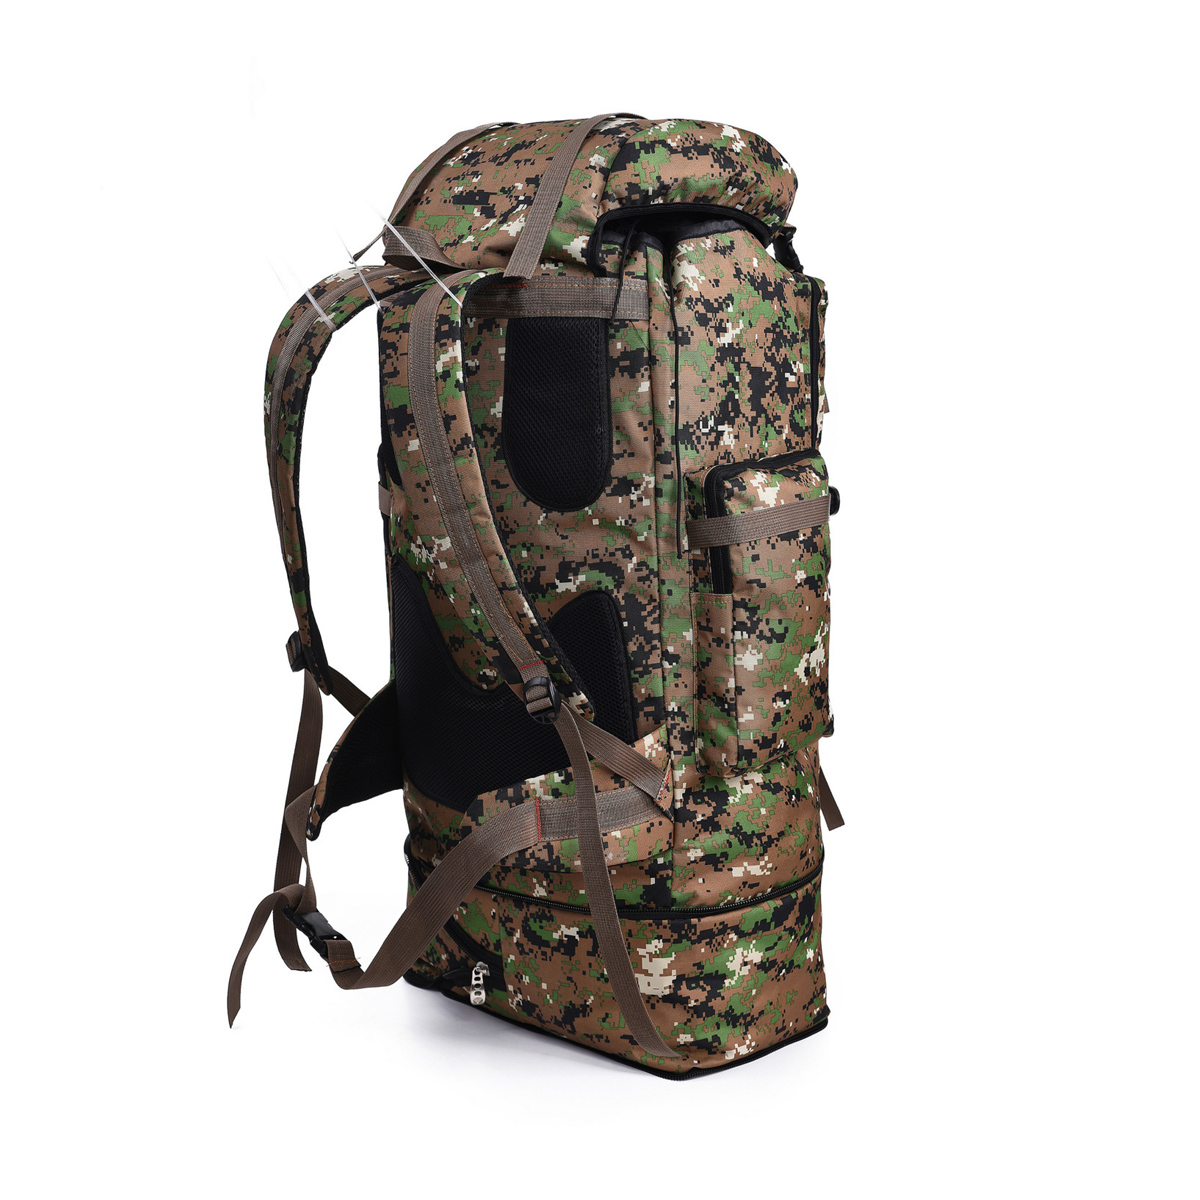 90-100L-Military-Tactical-Backpack-Waterproof-Molle-Climbing-Bag-Outdoor-Trekking-Camping-1865666-6